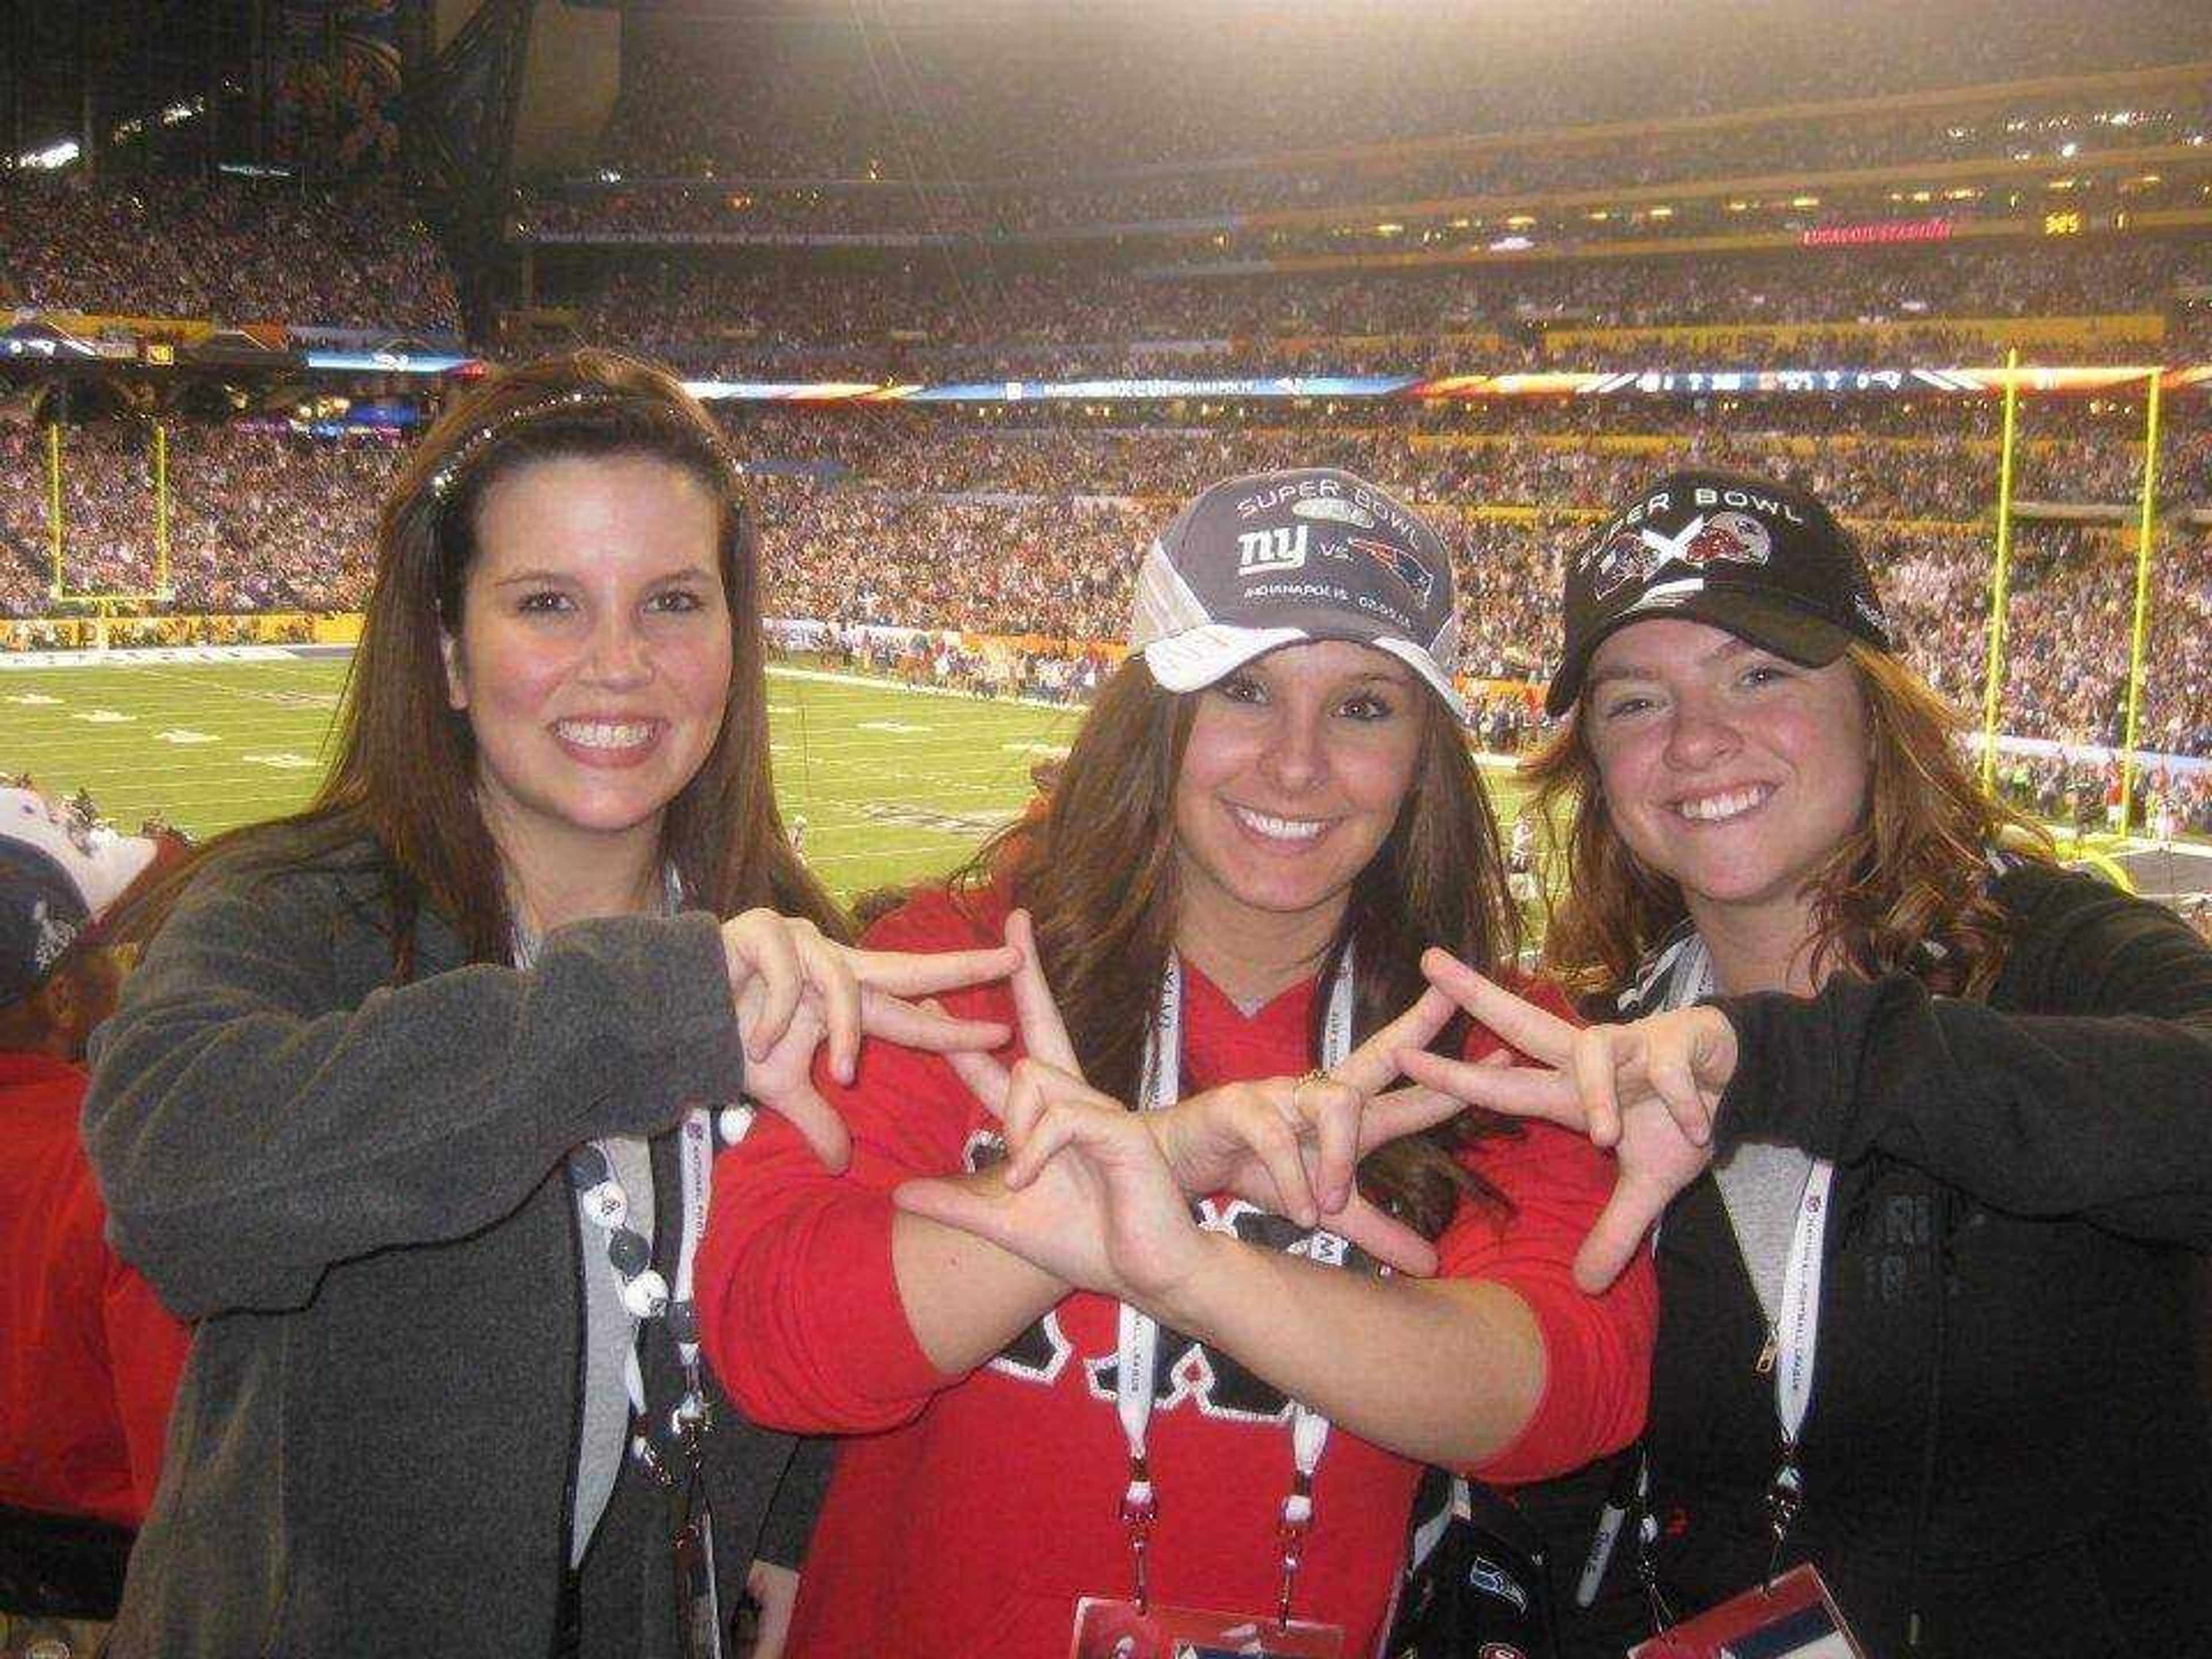 from left to right: Alpha Chi Omega sorority members Myka Fitch, Chelsea Chockley, and Kelly Farrell at the Super Bowl Game